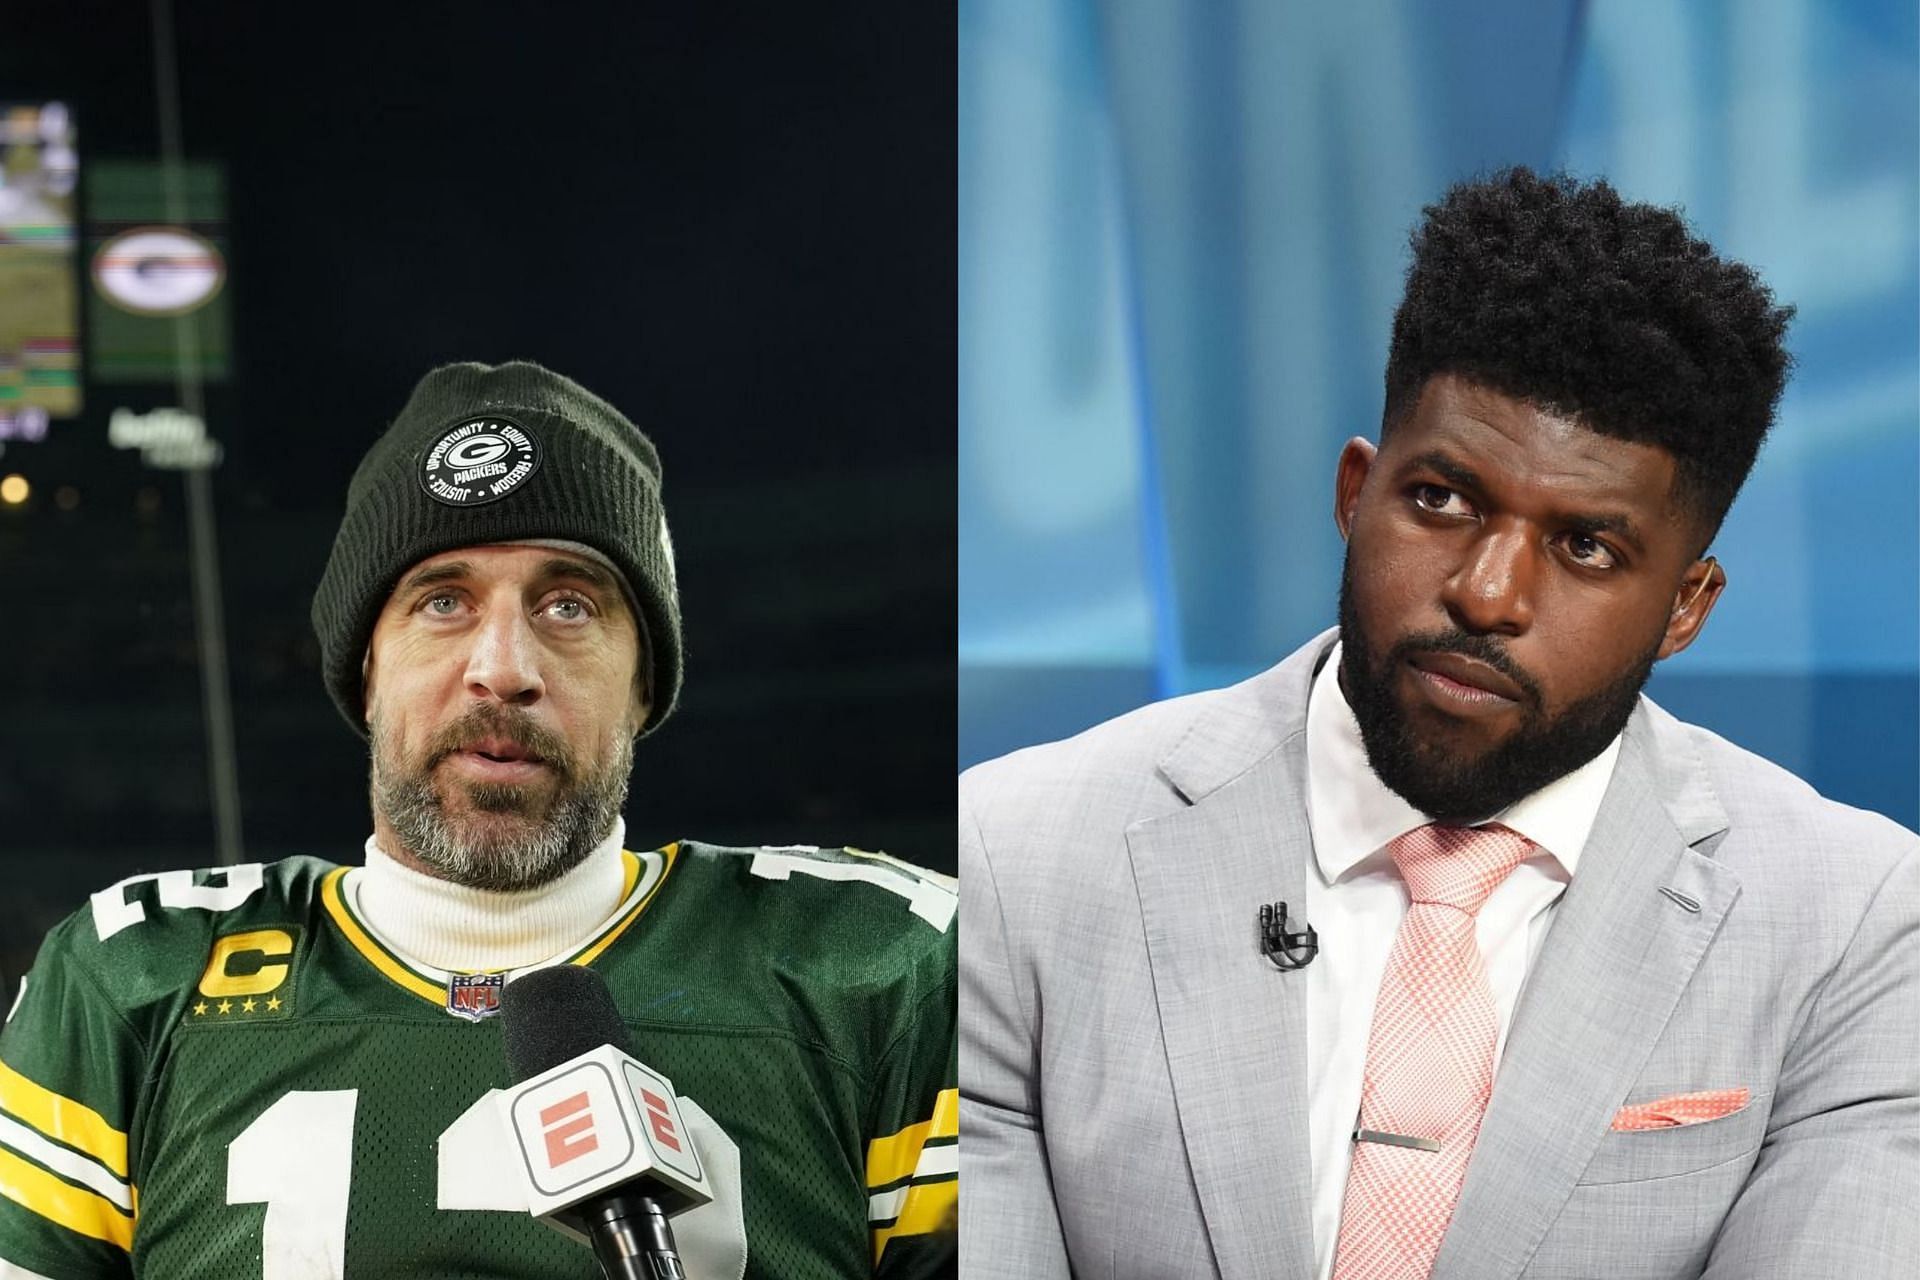 Aaron Rodgers and Emmanuel Acho